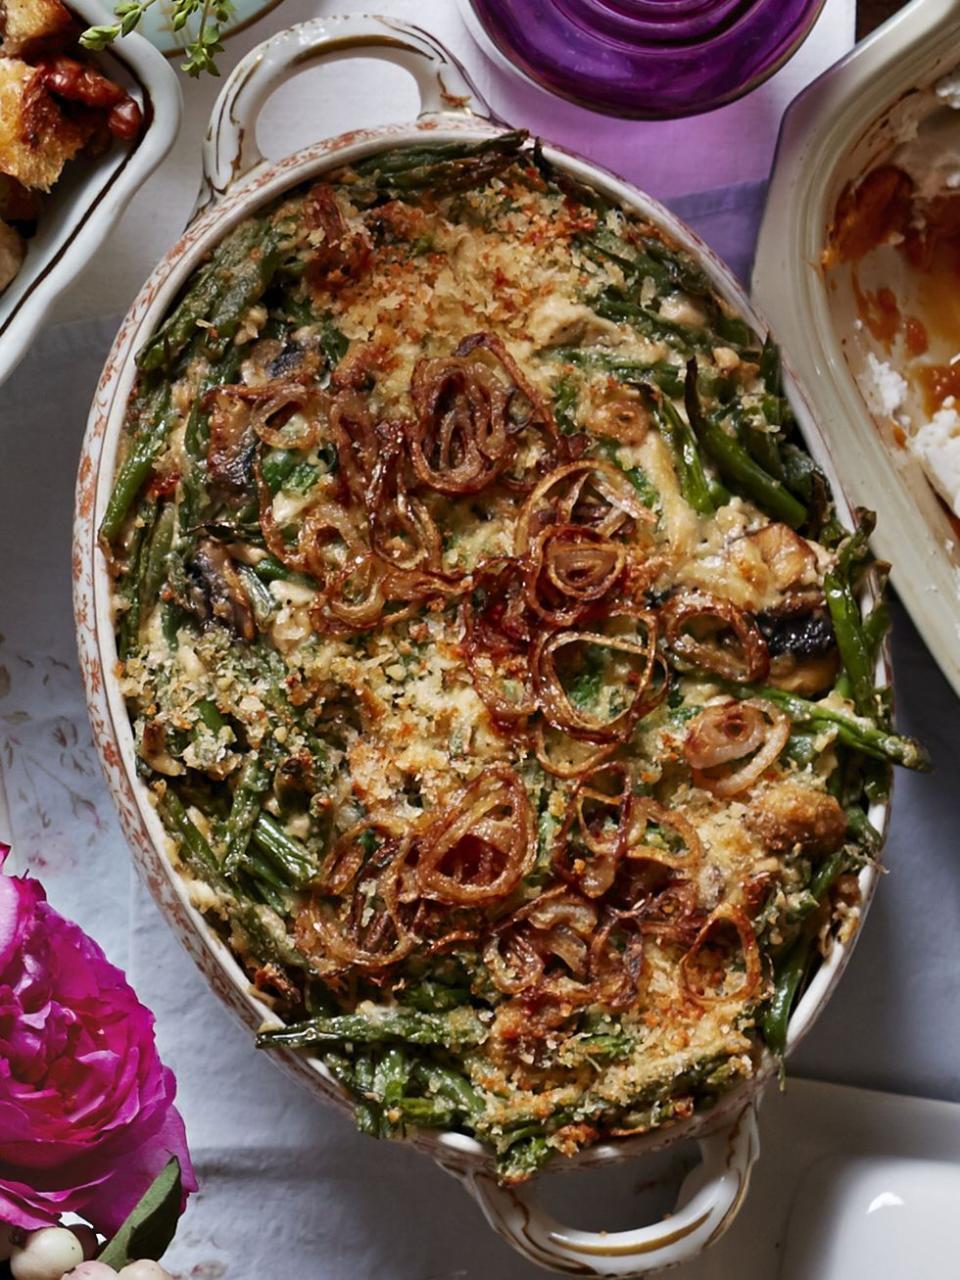 <p>We added caramelized onions and parmesan cheese to elevate this traditional Thanksgiving side dish.</p><p>Get the <a href="https://www.goodhousekeeping.com/food-recipes/a16135/green-bean-casserole-fried-shallots-recipe-clx1114/" rel="nofollow noopener" target="_blank" data-ylk="slk:Green Bean Casserole with Fried Onions recipe" class="link "><strong>Green Bean Casserole with Fried Onions recipe</strong></a>.<br></p>